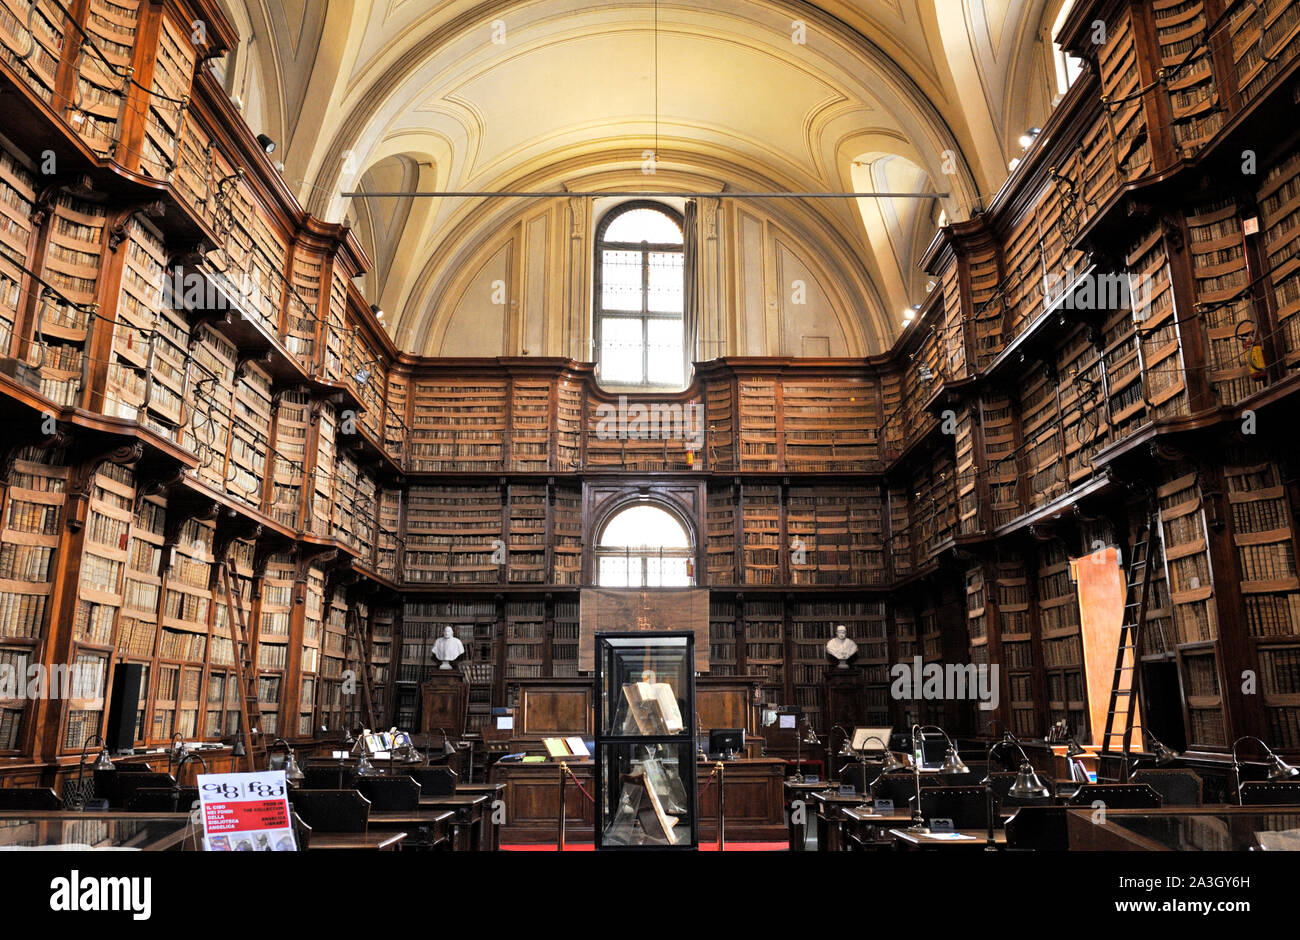 L'Italie, Rome, biblioteca angelica library Banque D'Images